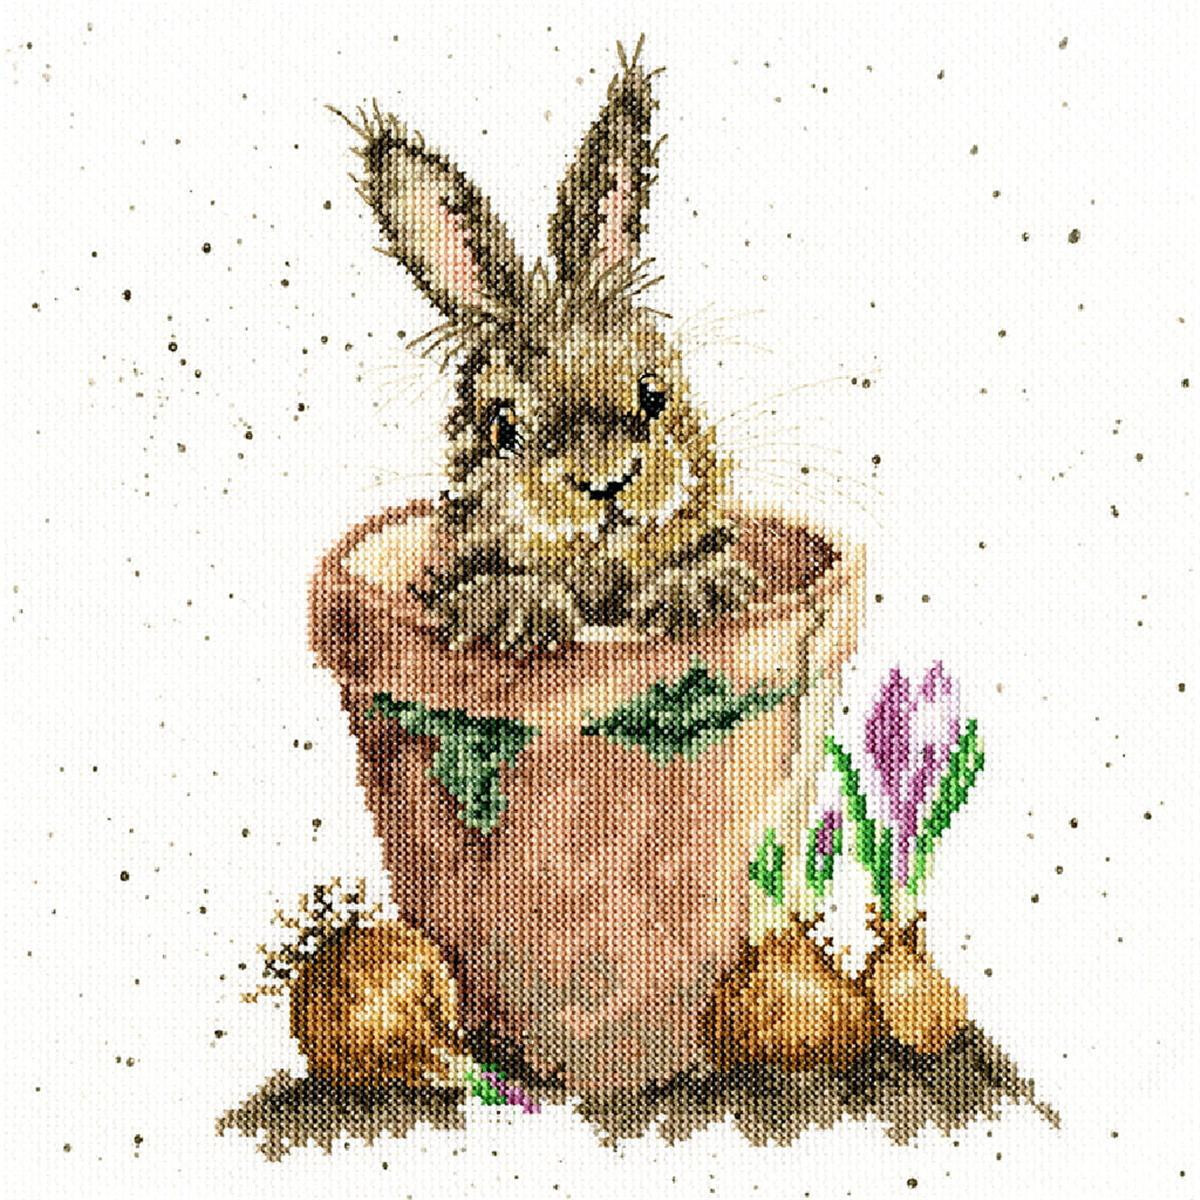 An embroidery pack from Bothy Threads with a brown rabbit...